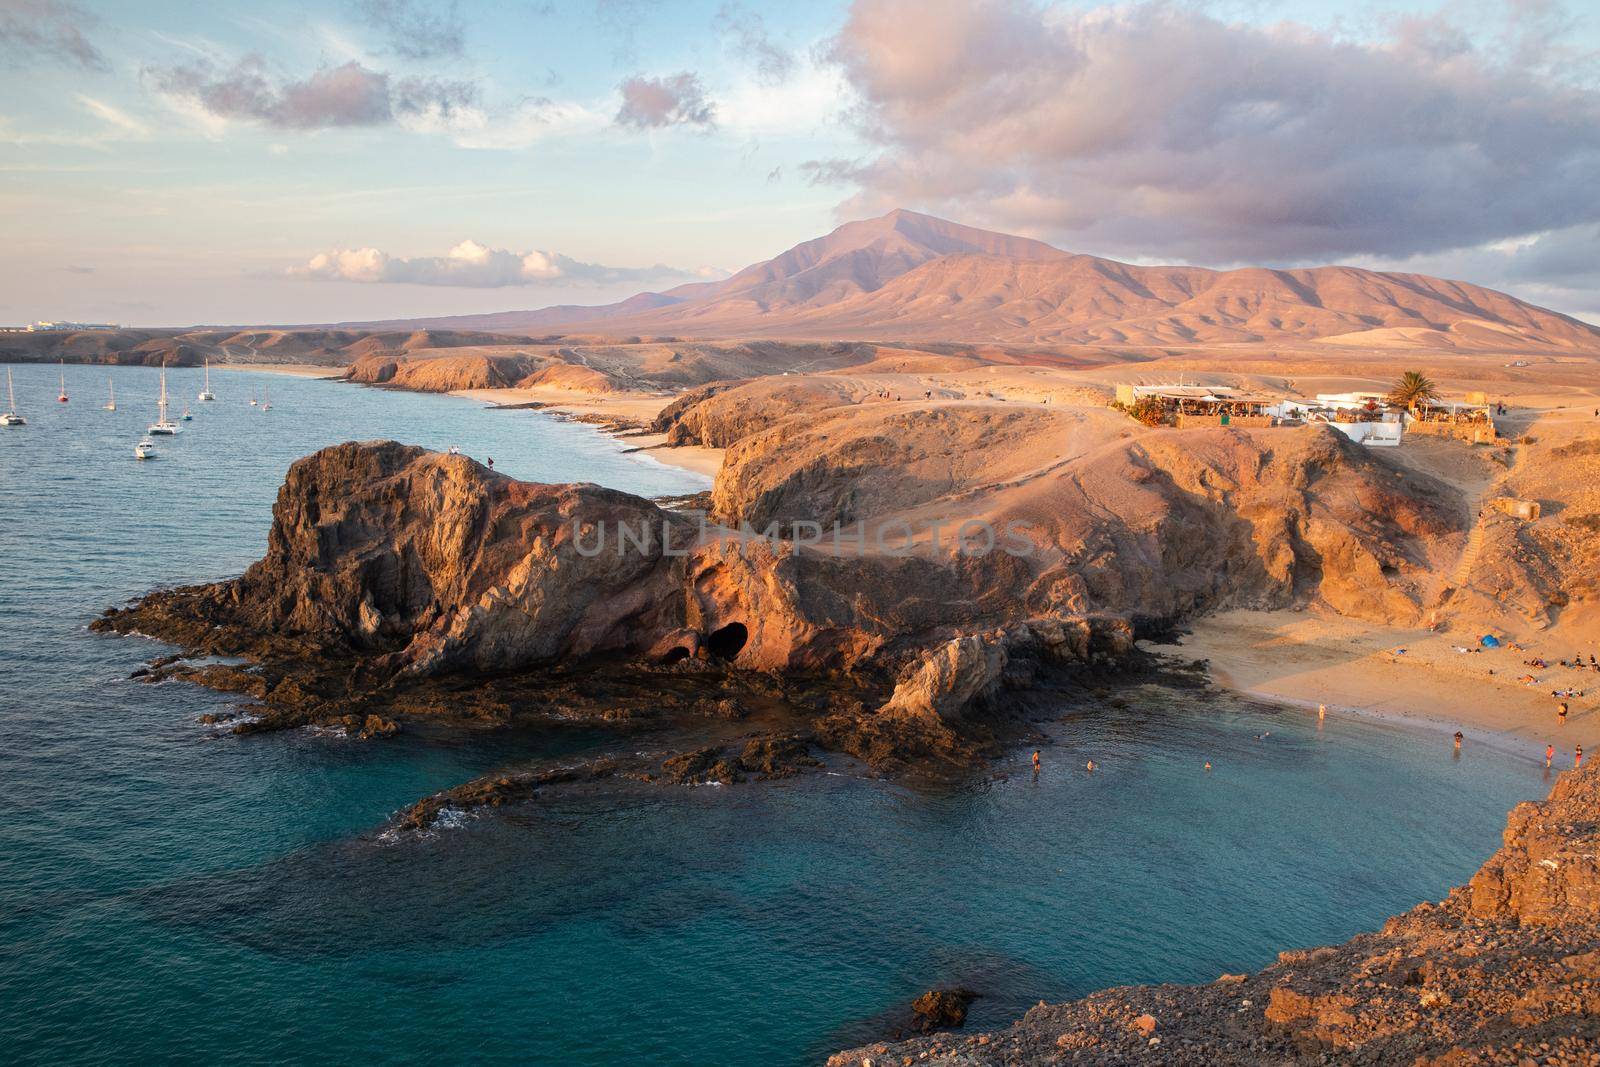 Landscape with turquoise ocean water on Papagayo beach, Lanzarote, Canary Islands, Spain